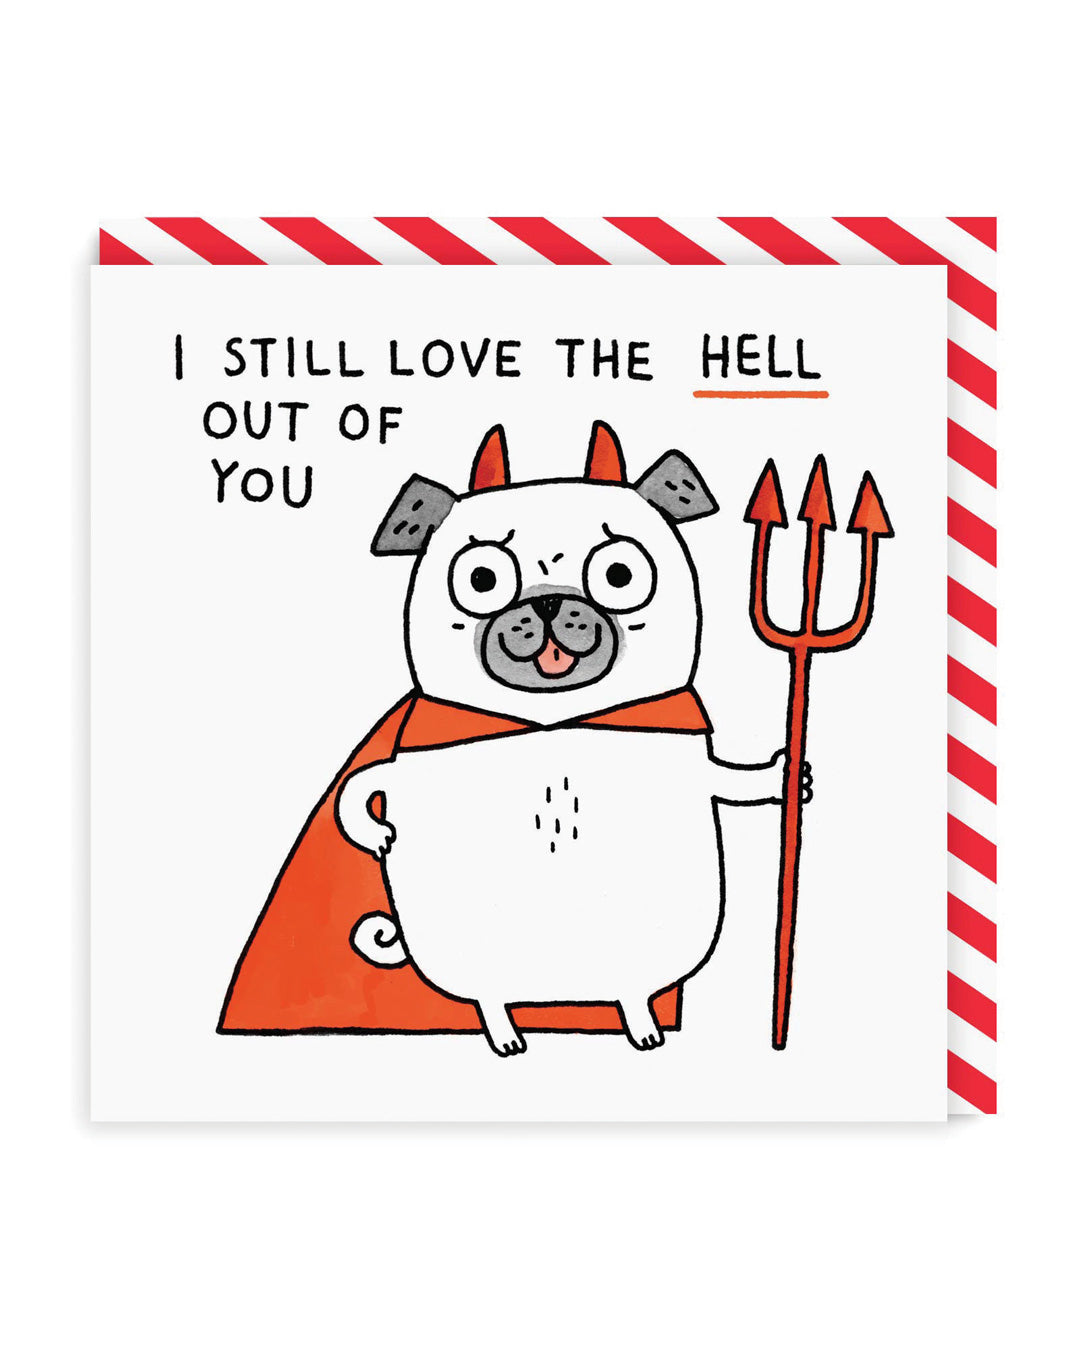 Valentine’s Day | Funny Valentines Card For Him or Her | I Still Love The Hell Out Of You Square Greeting Card | Ohh Deer Unique Valentine’s Card | Artwork by Gemma Correll | Made In The UK, Eco-Friendly Materials, Plastic Free Packaging